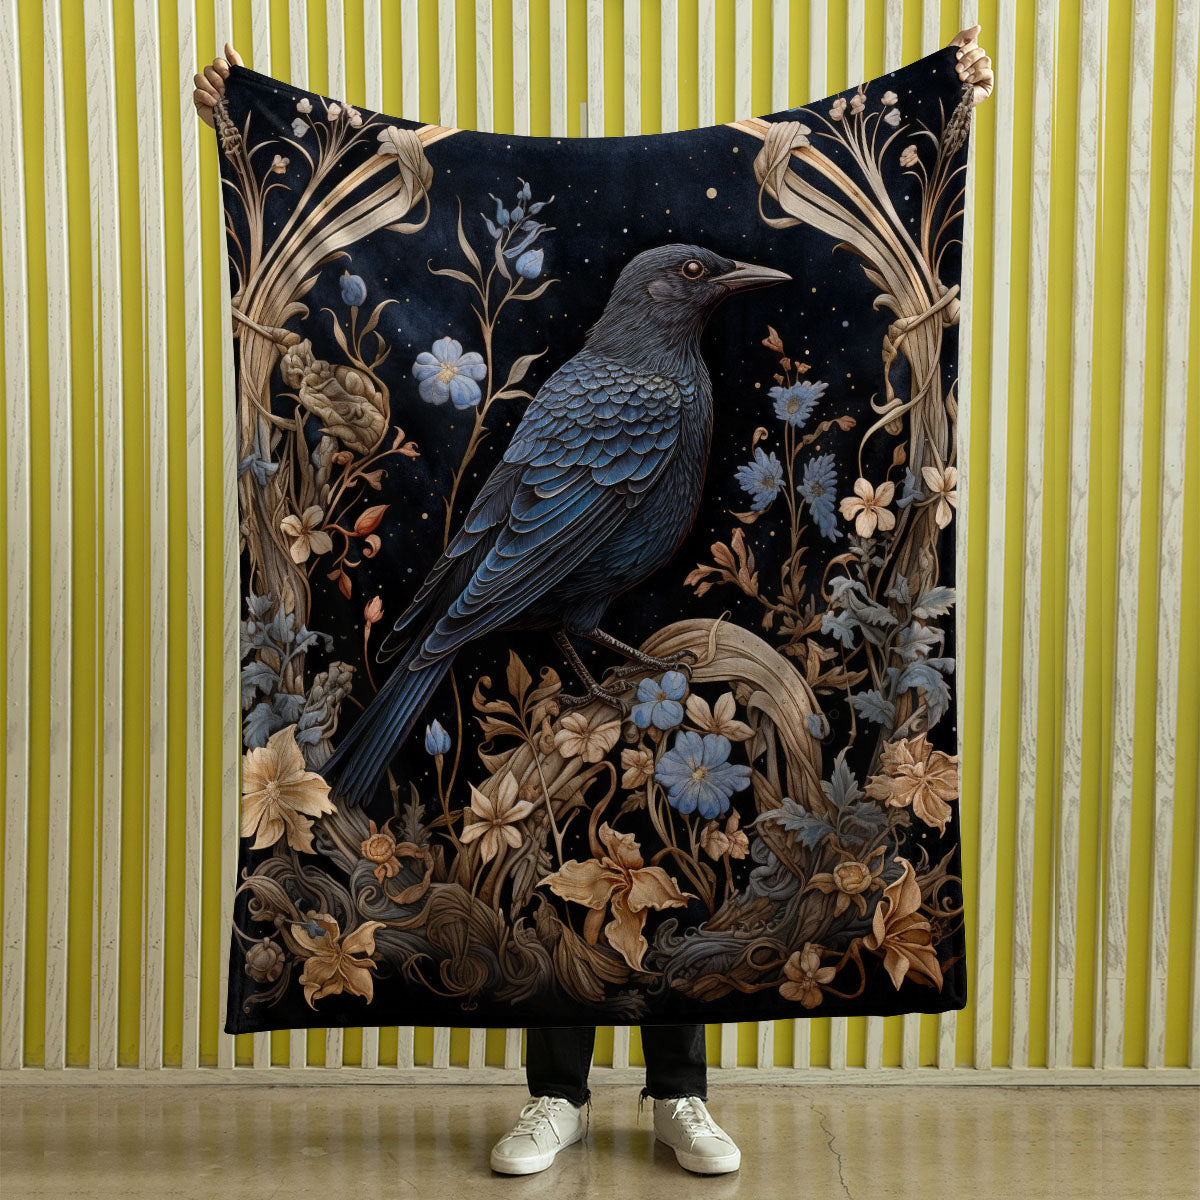 Dark Cottagecore Crow Tapestry Woven | Raven Wall Art Blanket Woven Wall Hanging | Woodland Aesthetic Halloween Gothic Decor Crow Blanket, Bird And Flower 004